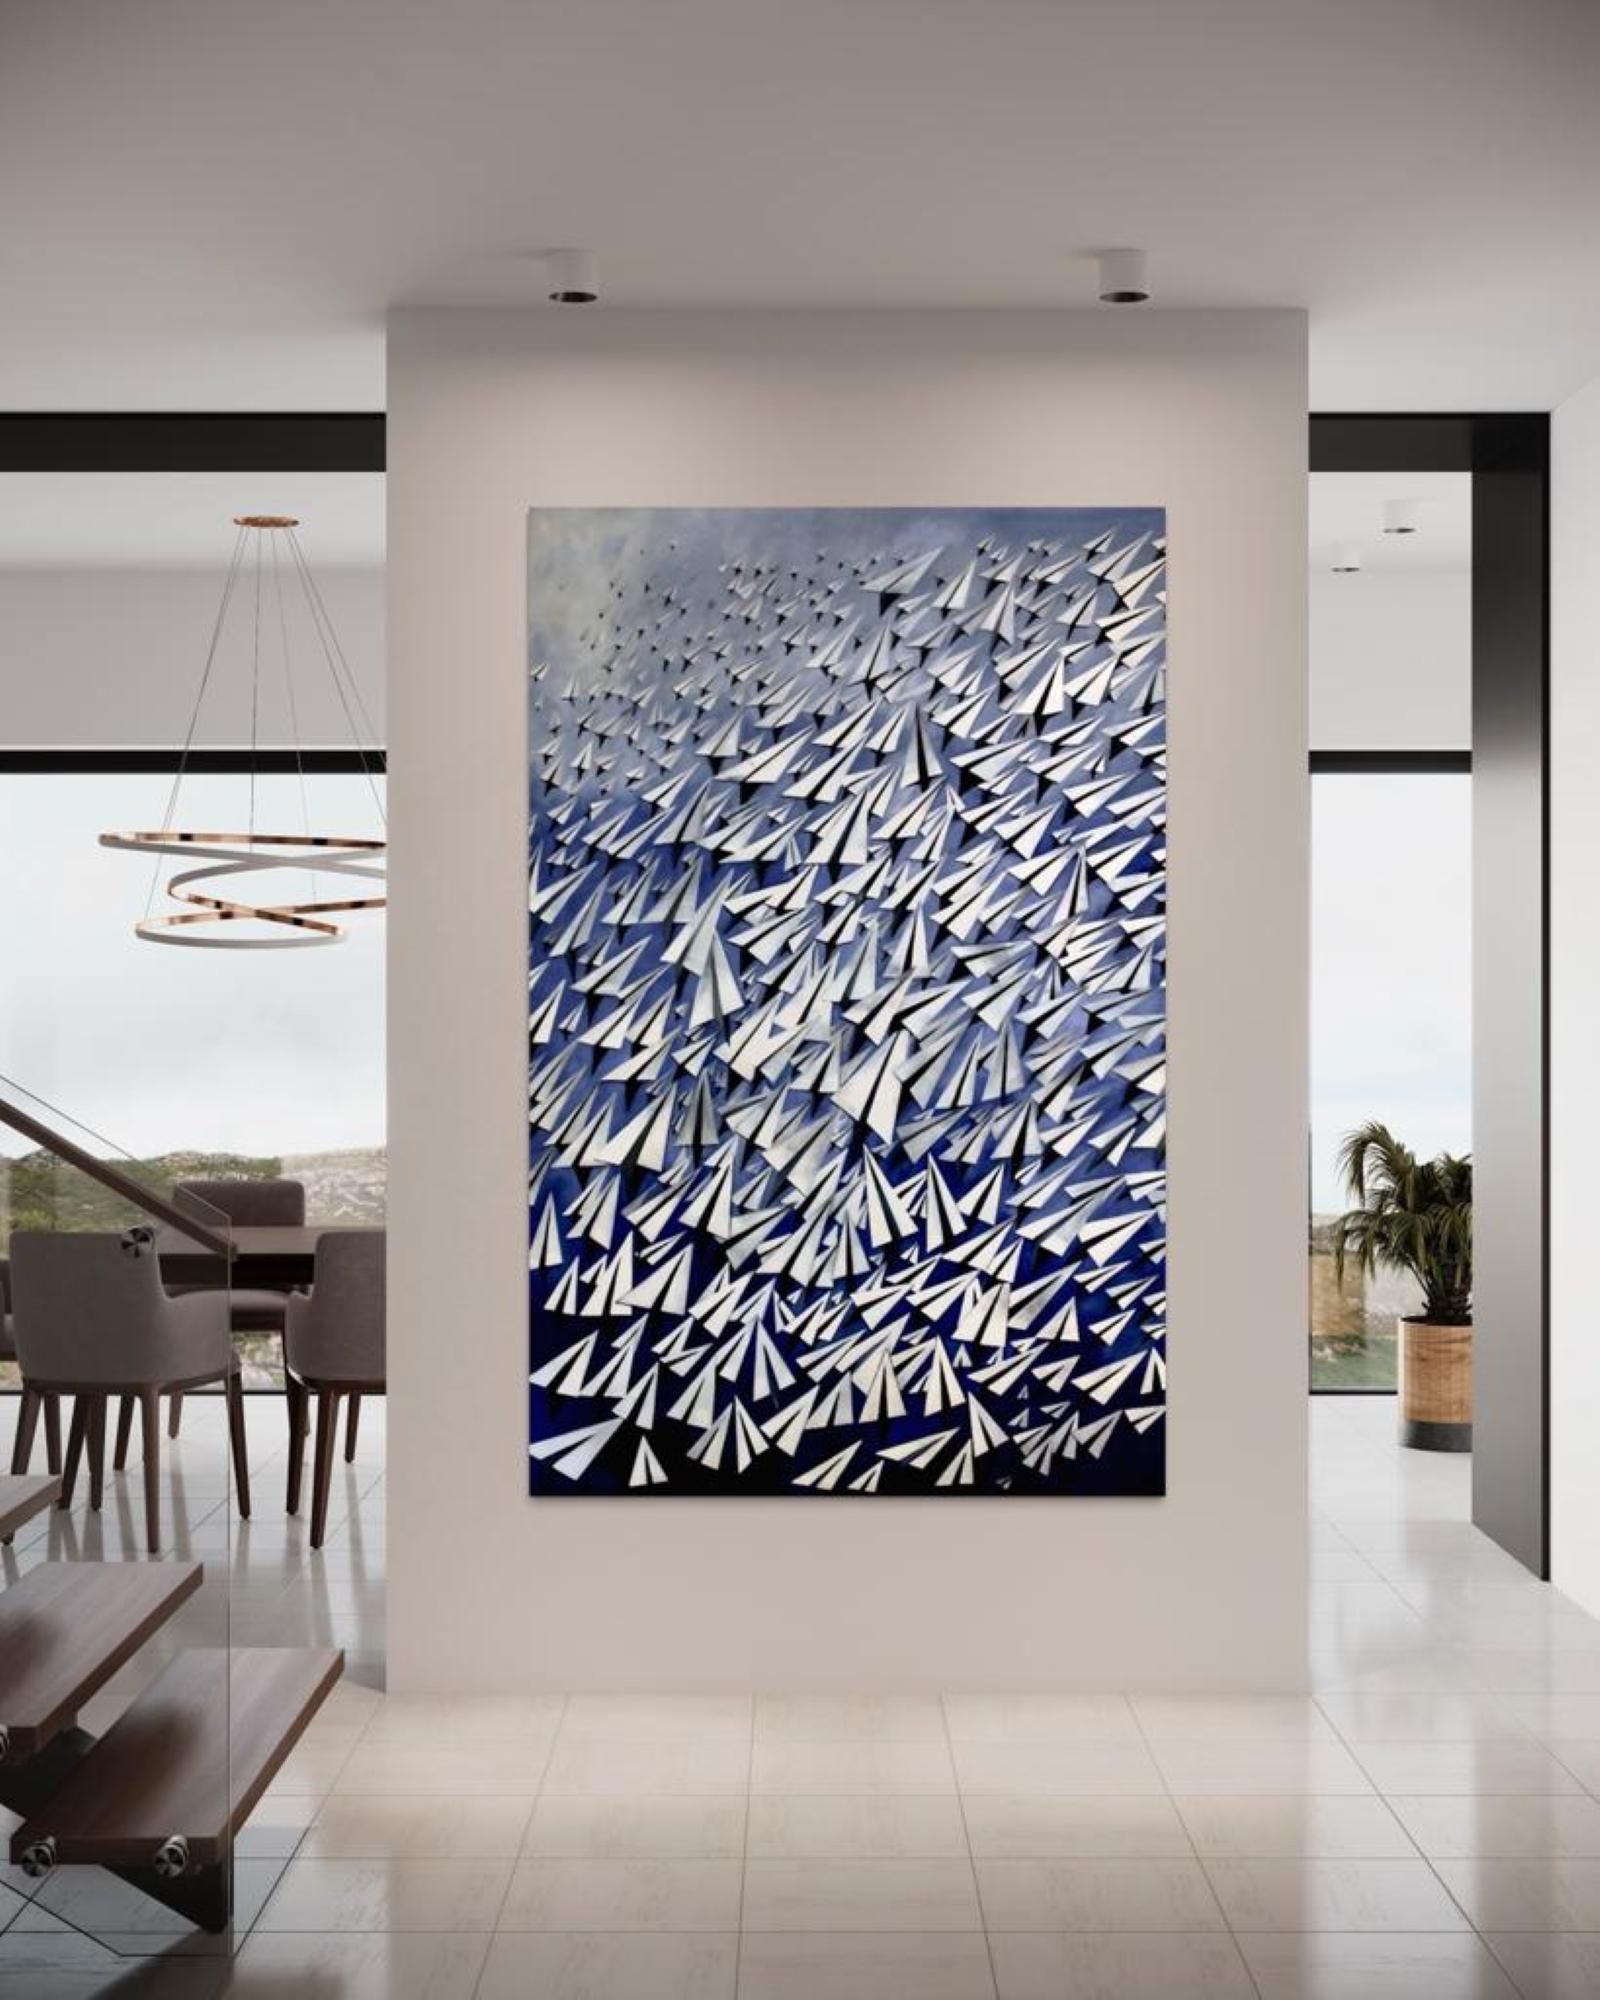 54x84 Stretched Canvas Print 
Paper airplane is a large print signed by the artist. The work is an amazing expression work create early in the life artist and executed in 2010. 

(